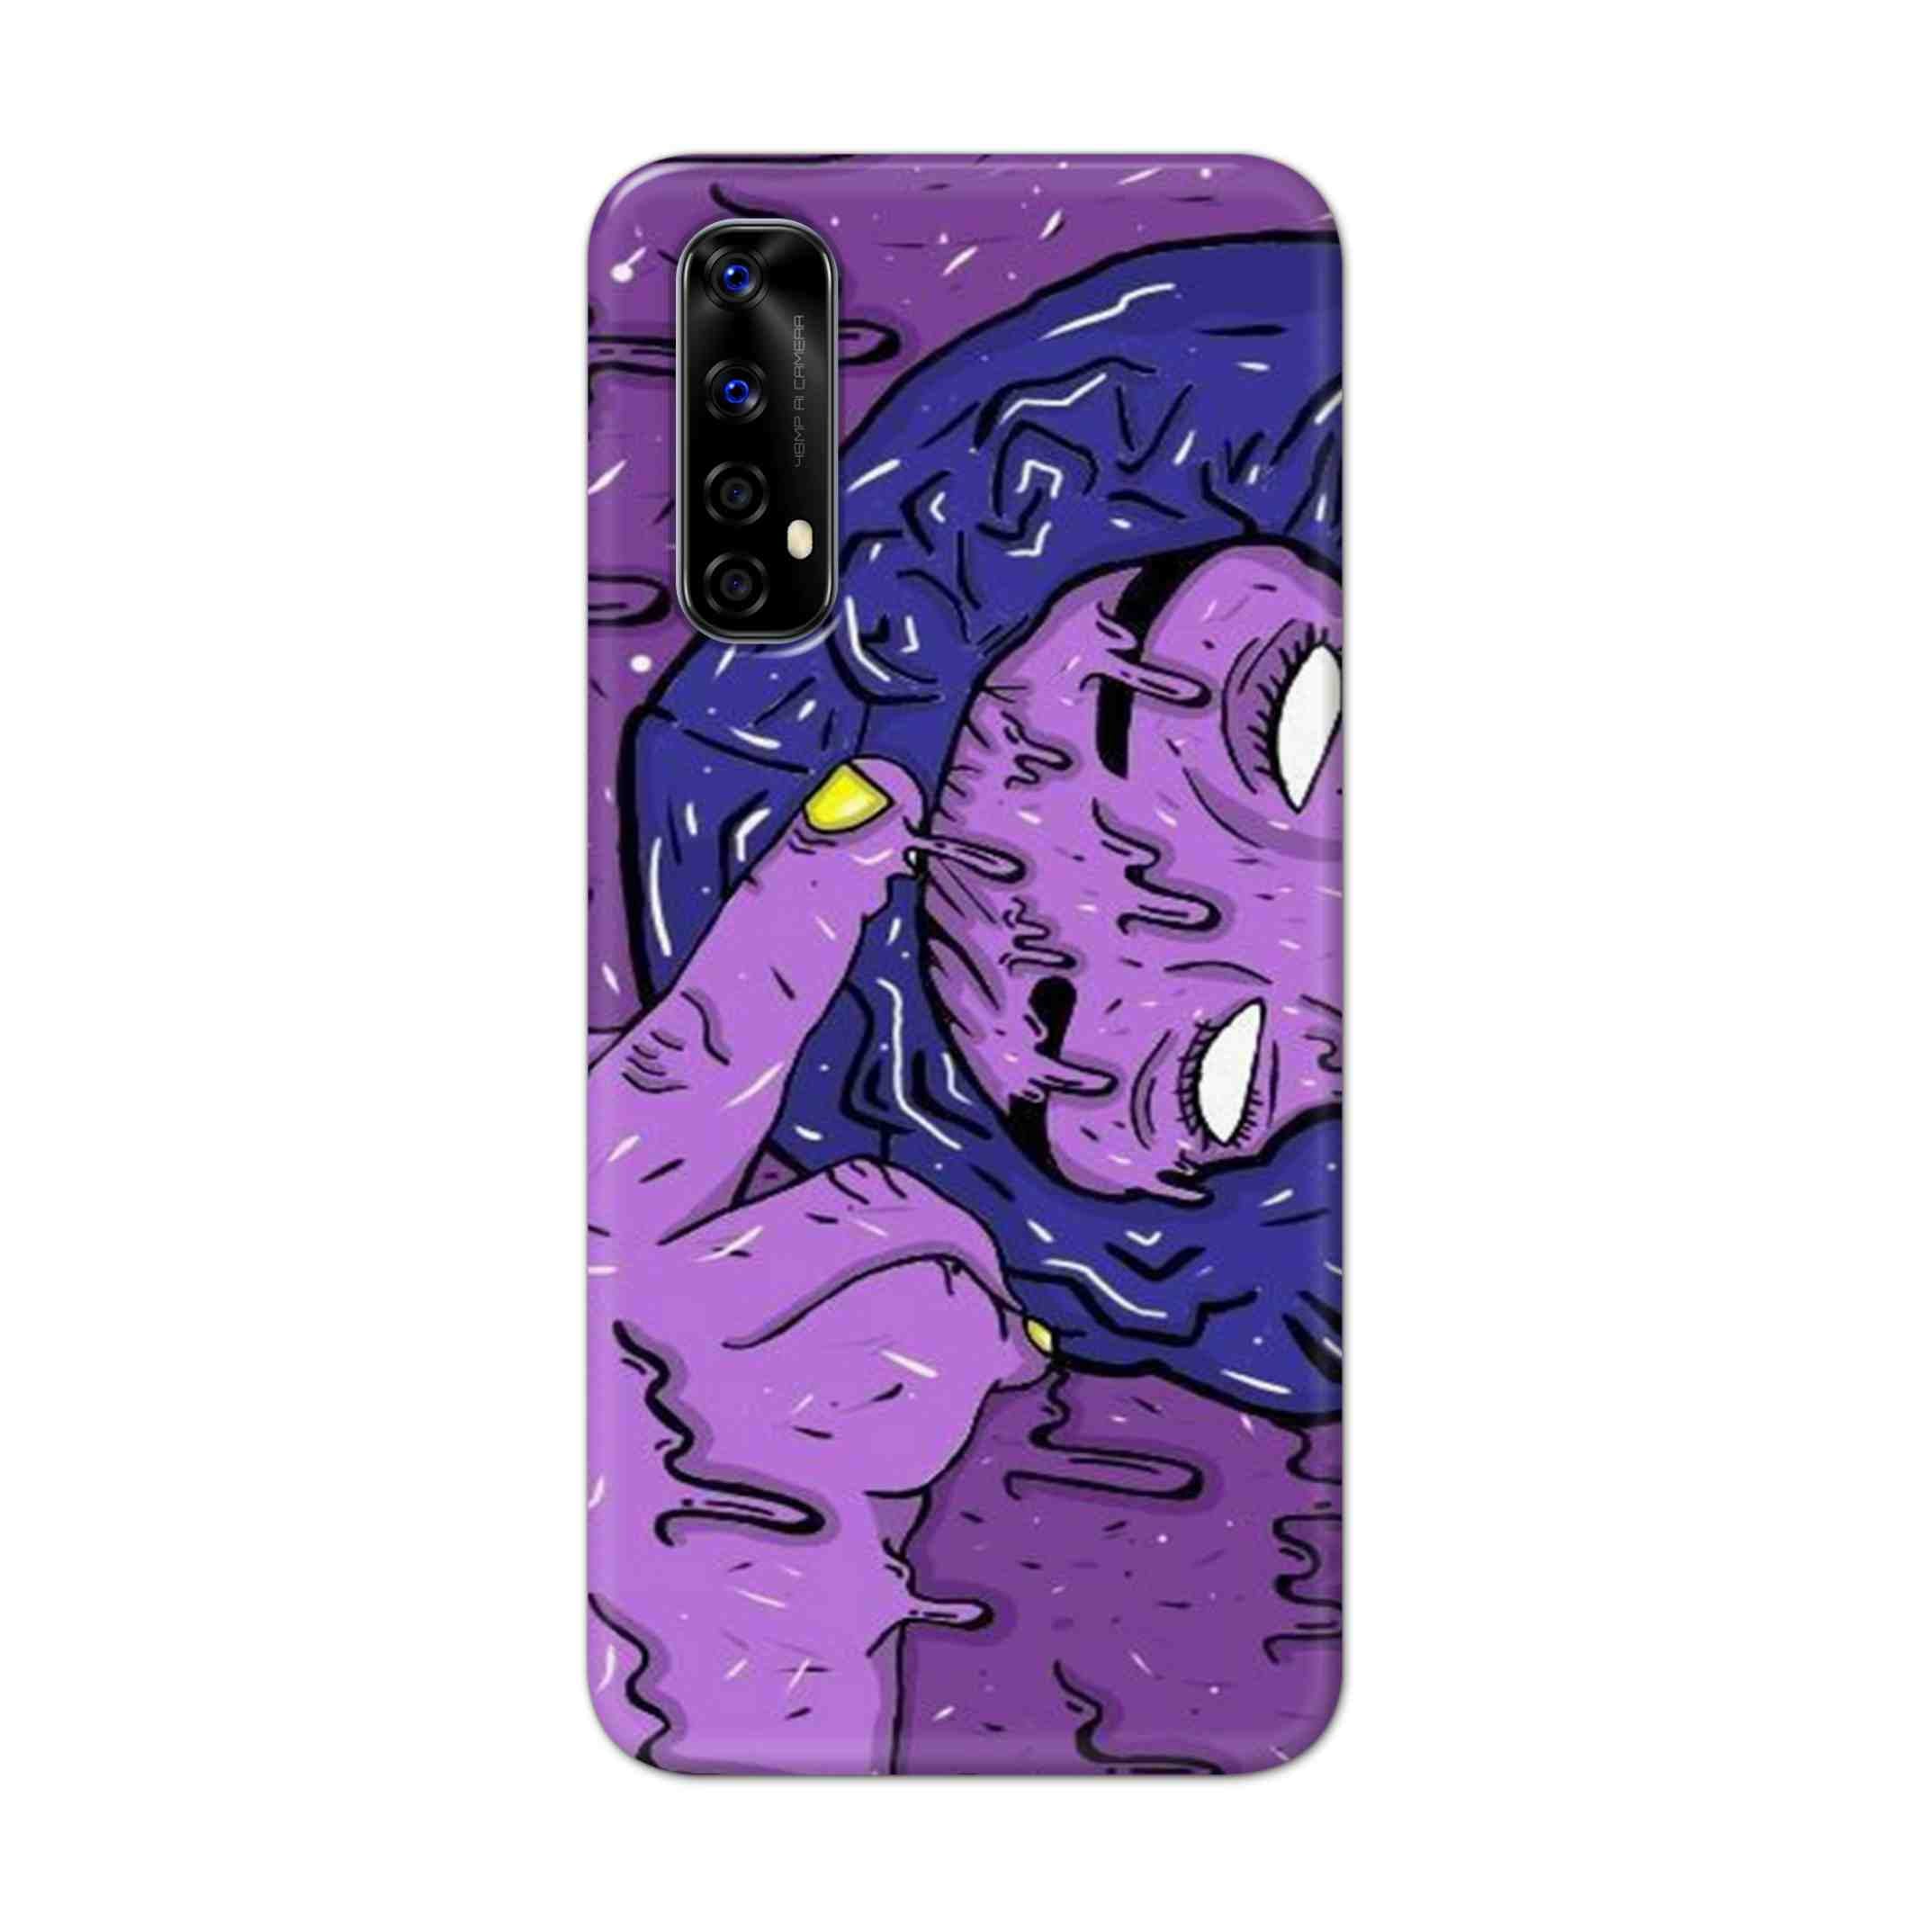 Buy Dashing Art Hard Back Mobile Phone Case Cover For Realme Narzo 20 Pro Online